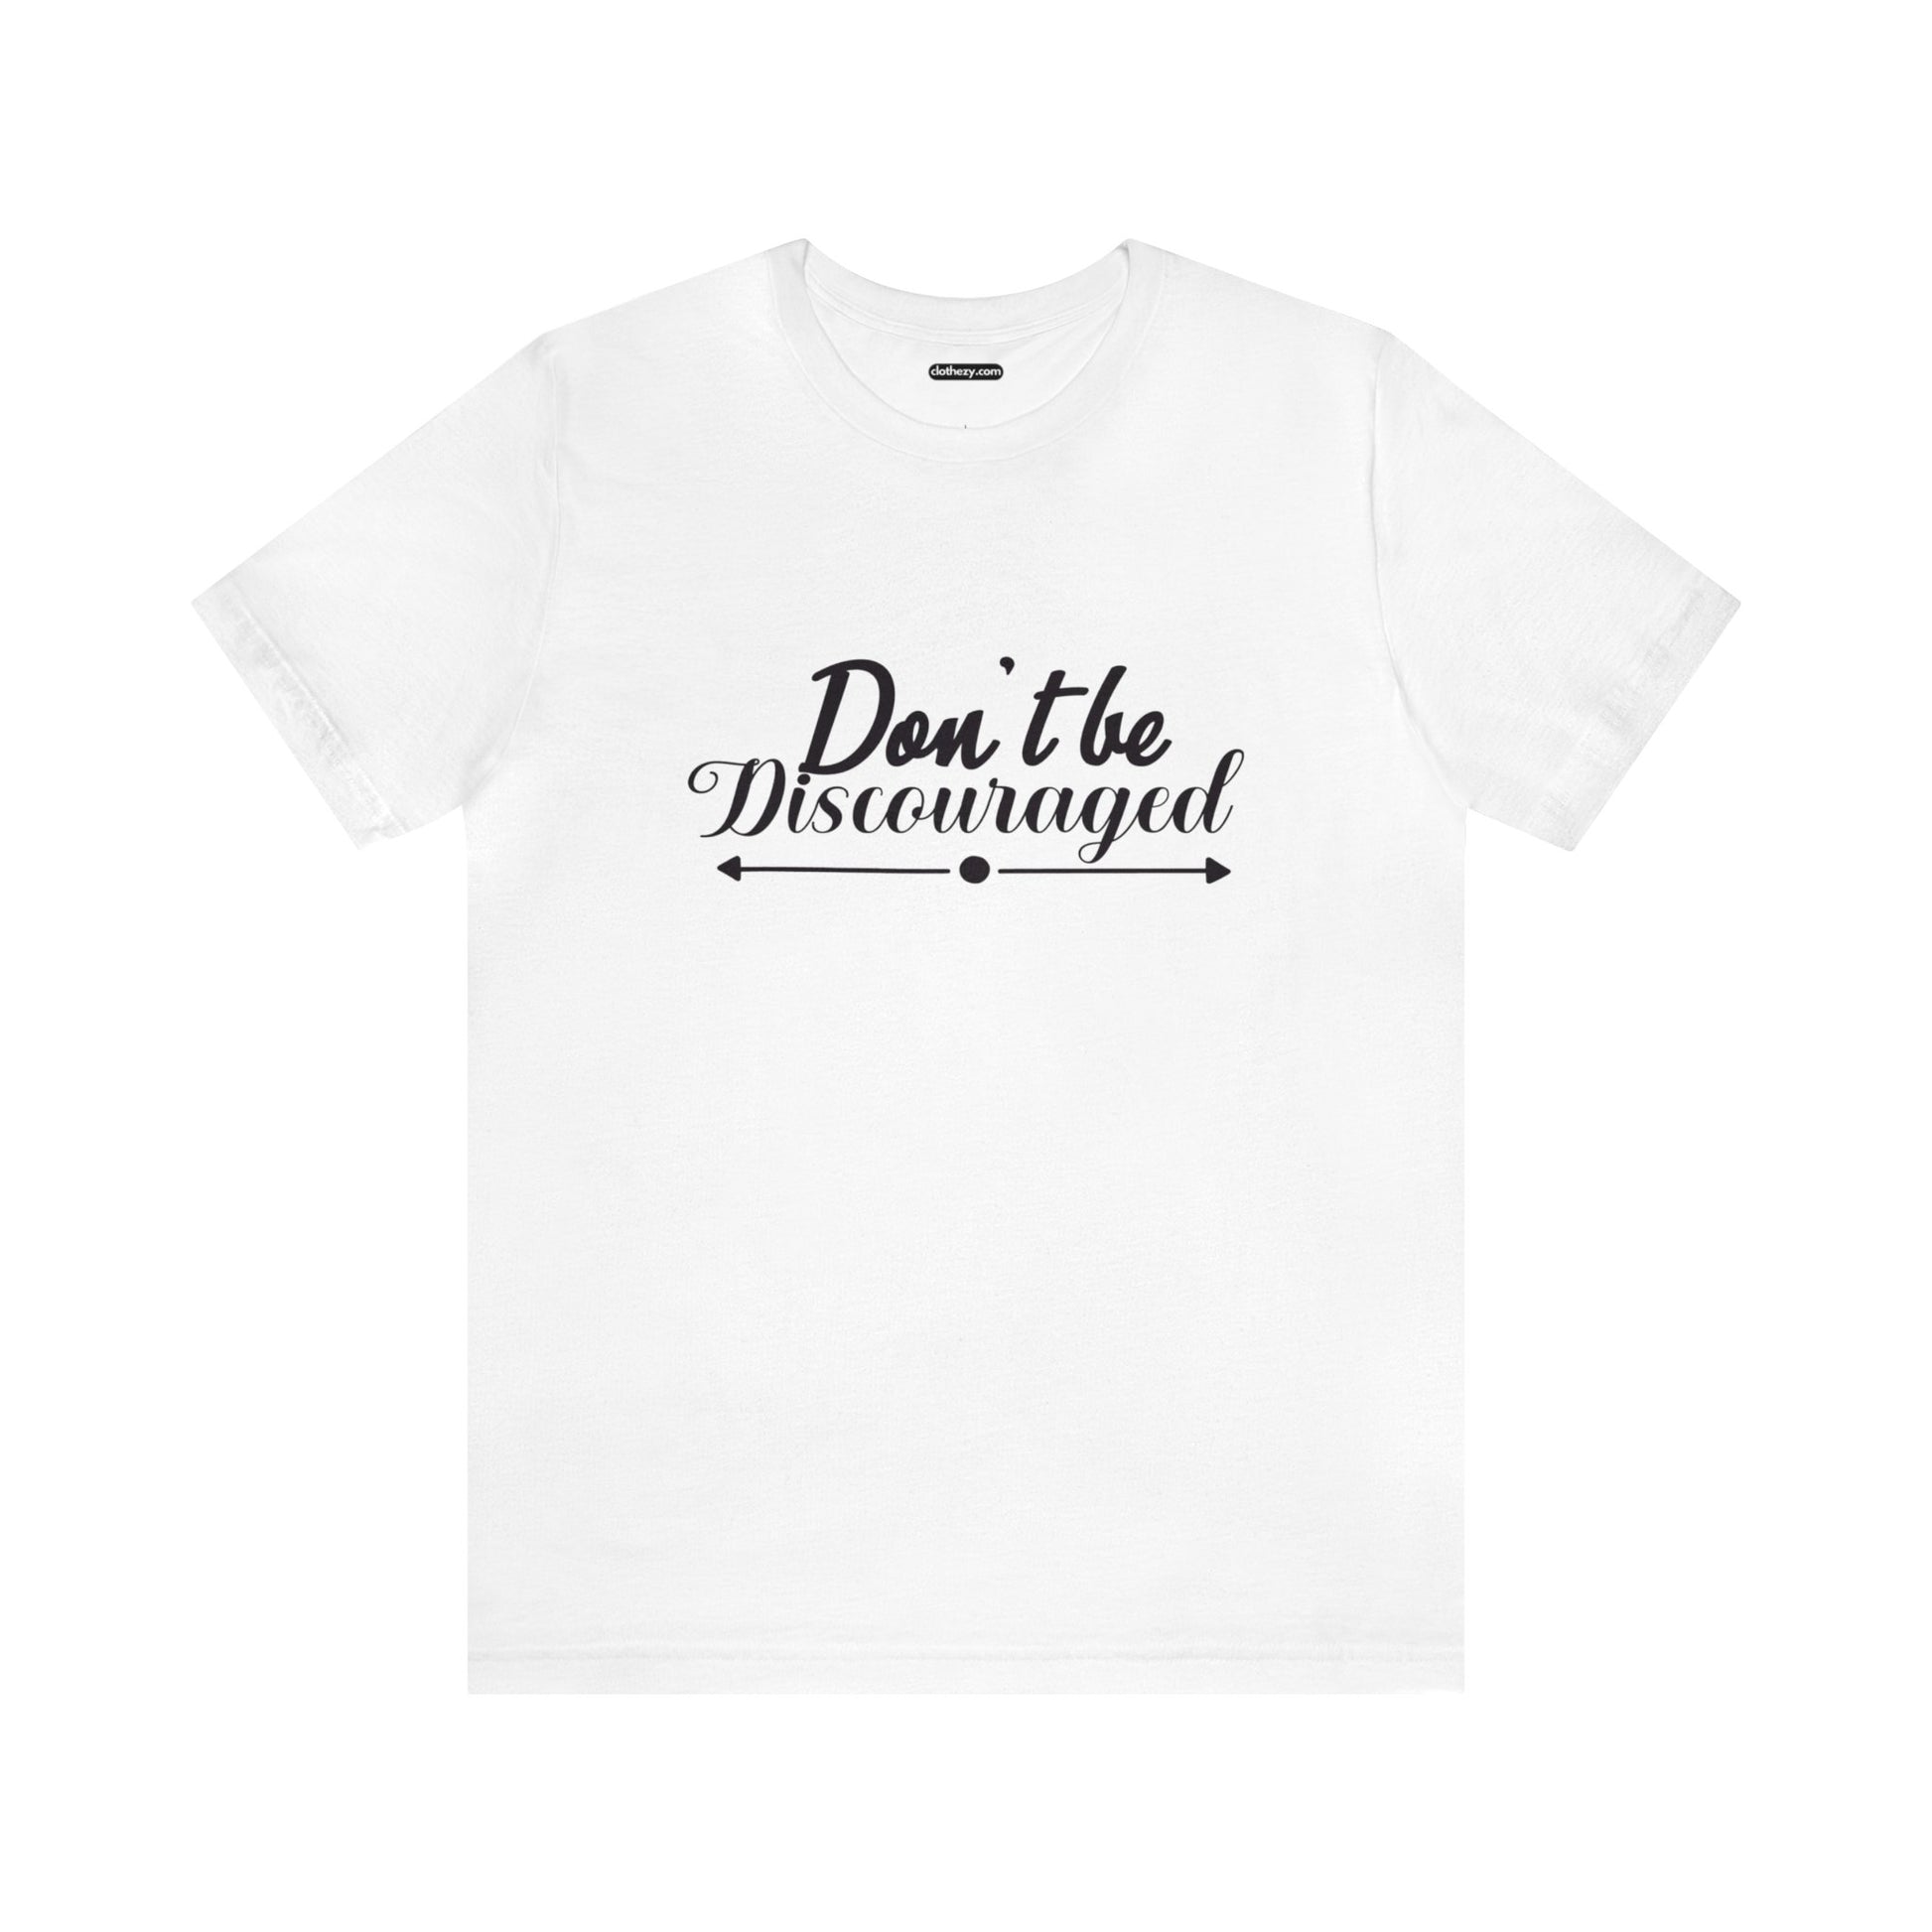 Don't Be Discouraged - Unisex Adult Tee by clothezy.com - Buy Now